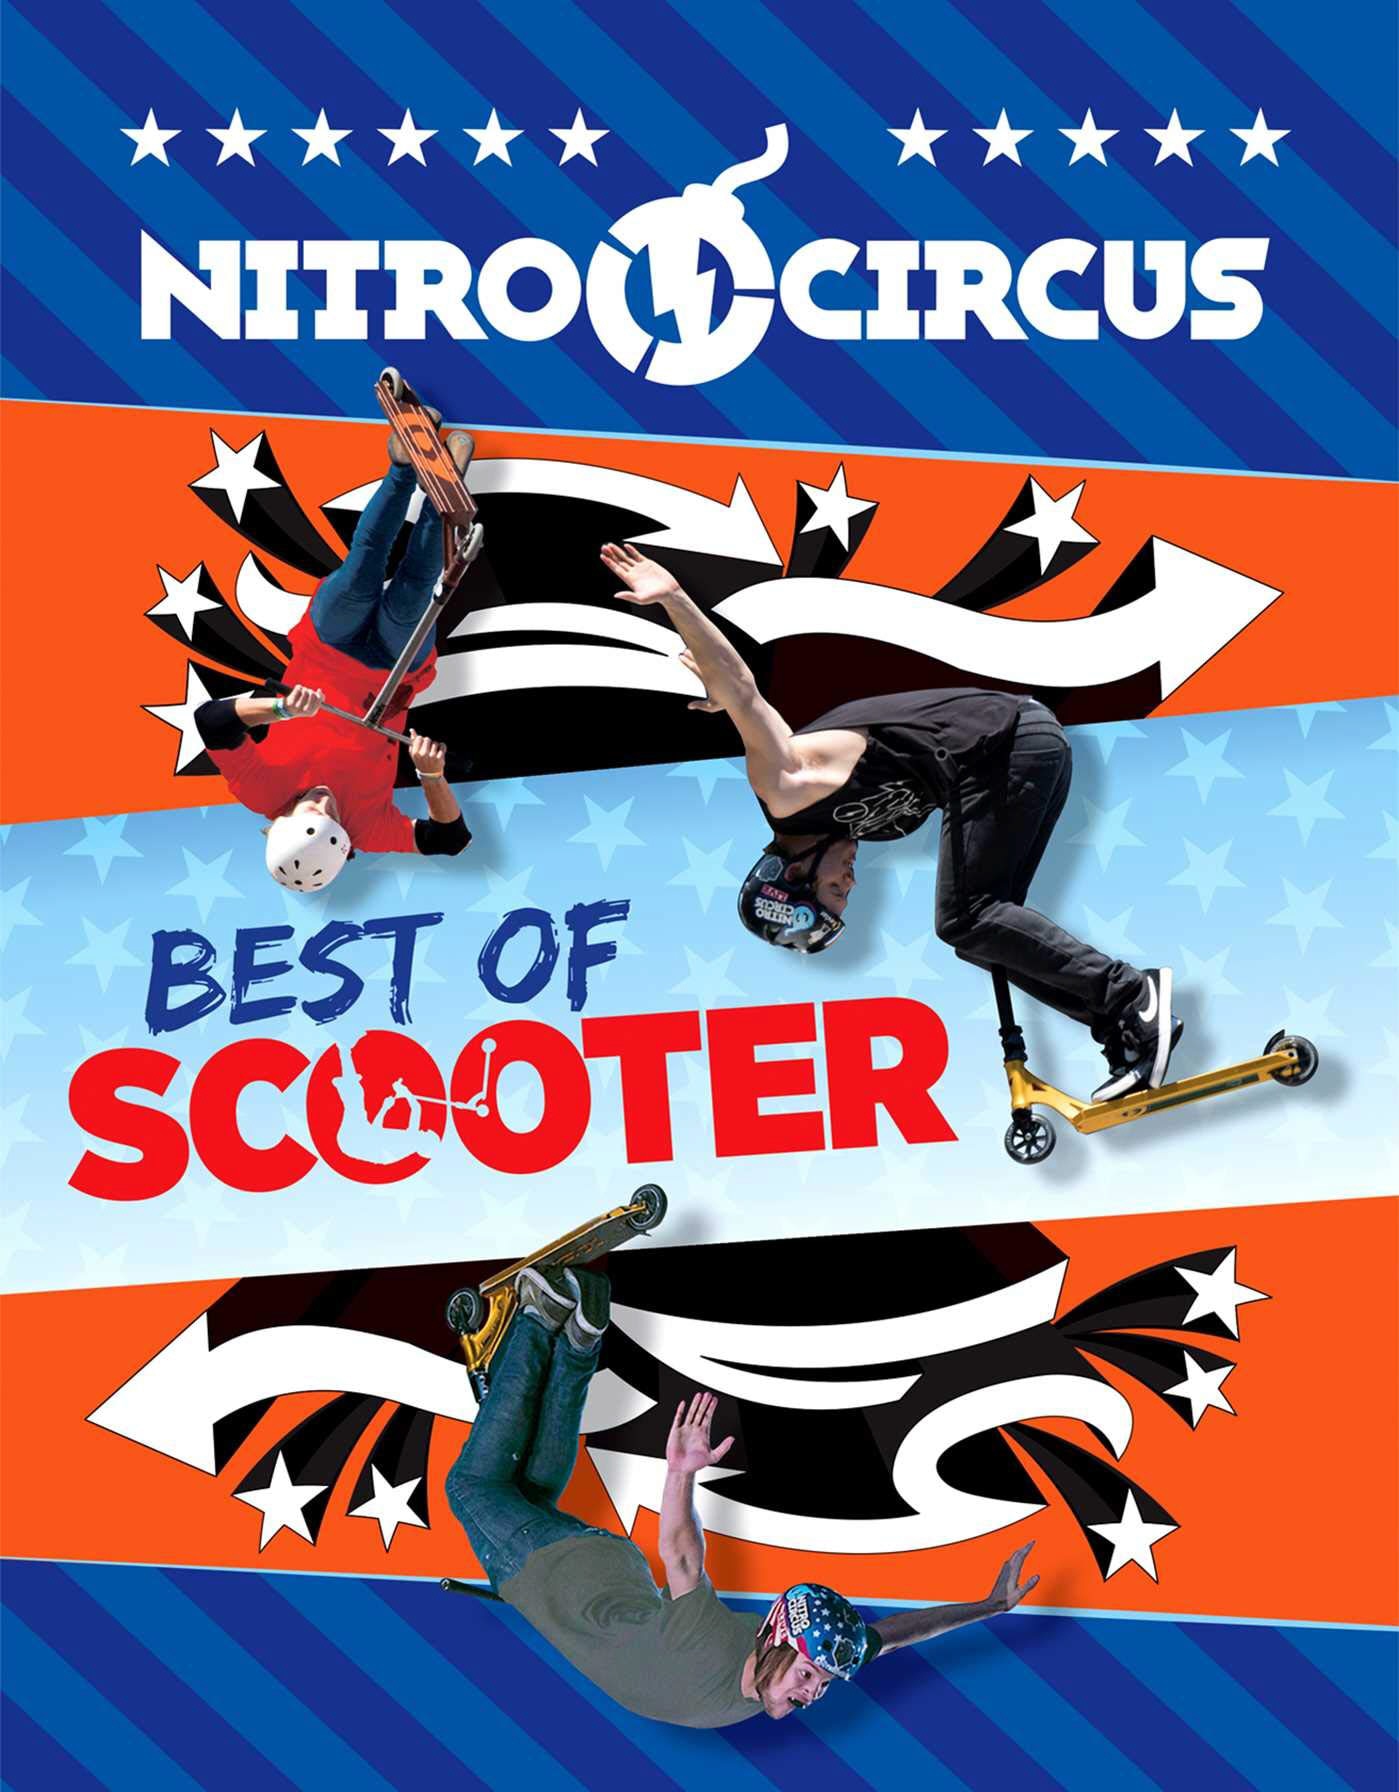 Book “Nitro Circus: Best of Scooter” by Ripley — July 25, 2019